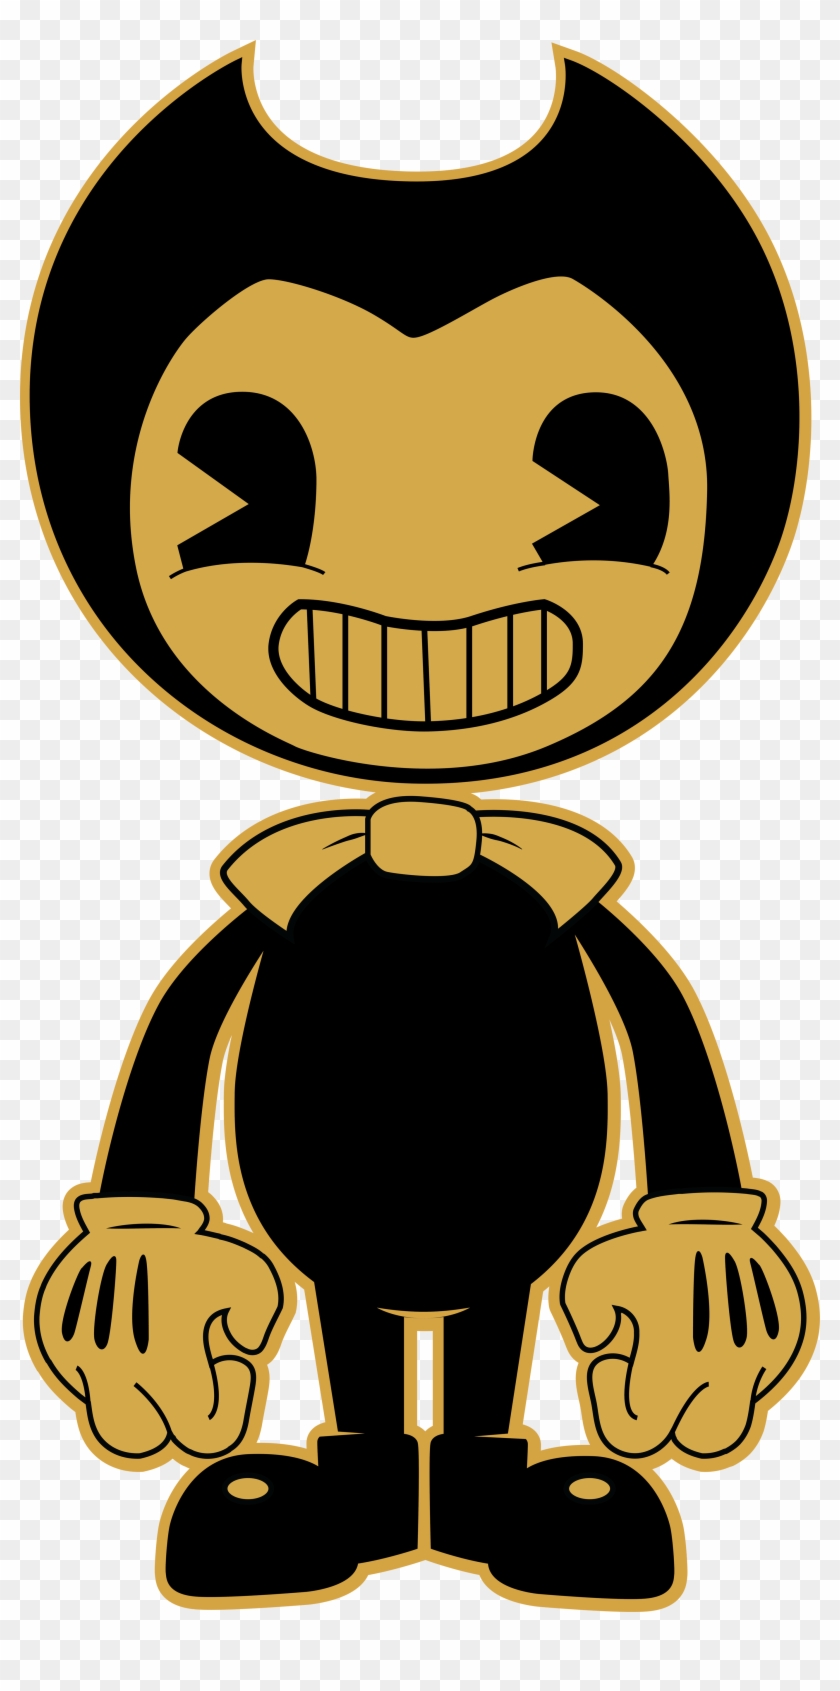 The Cutout Of Bendy - Bendy And The Ink Machine Bendy #162611